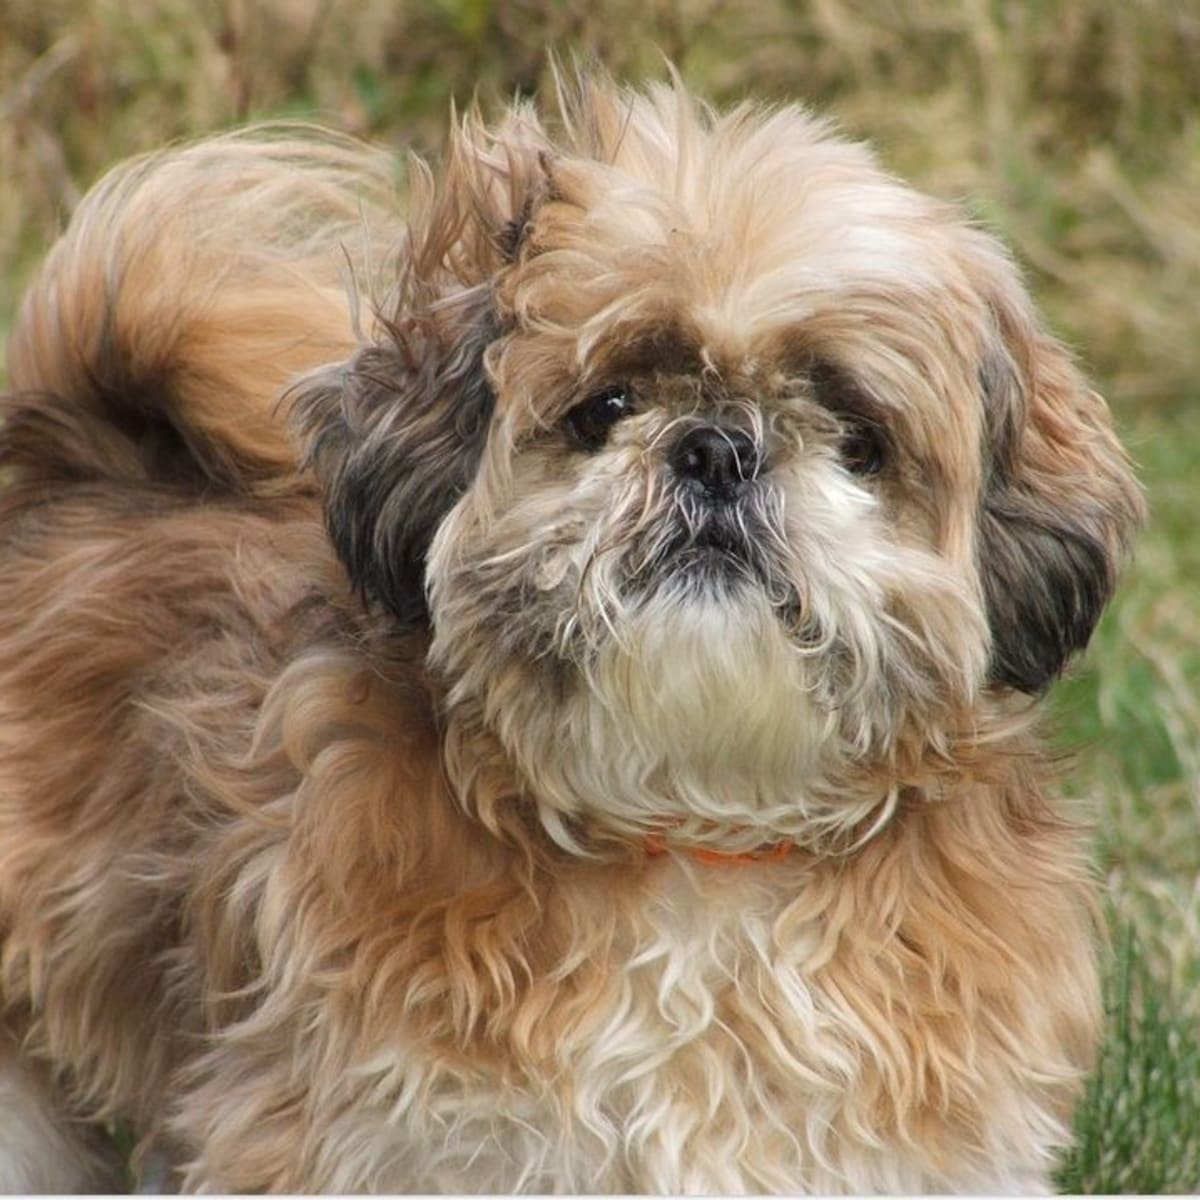 What Should I Do About Matted Hair Infections in Dogs? - Dog Discoveries